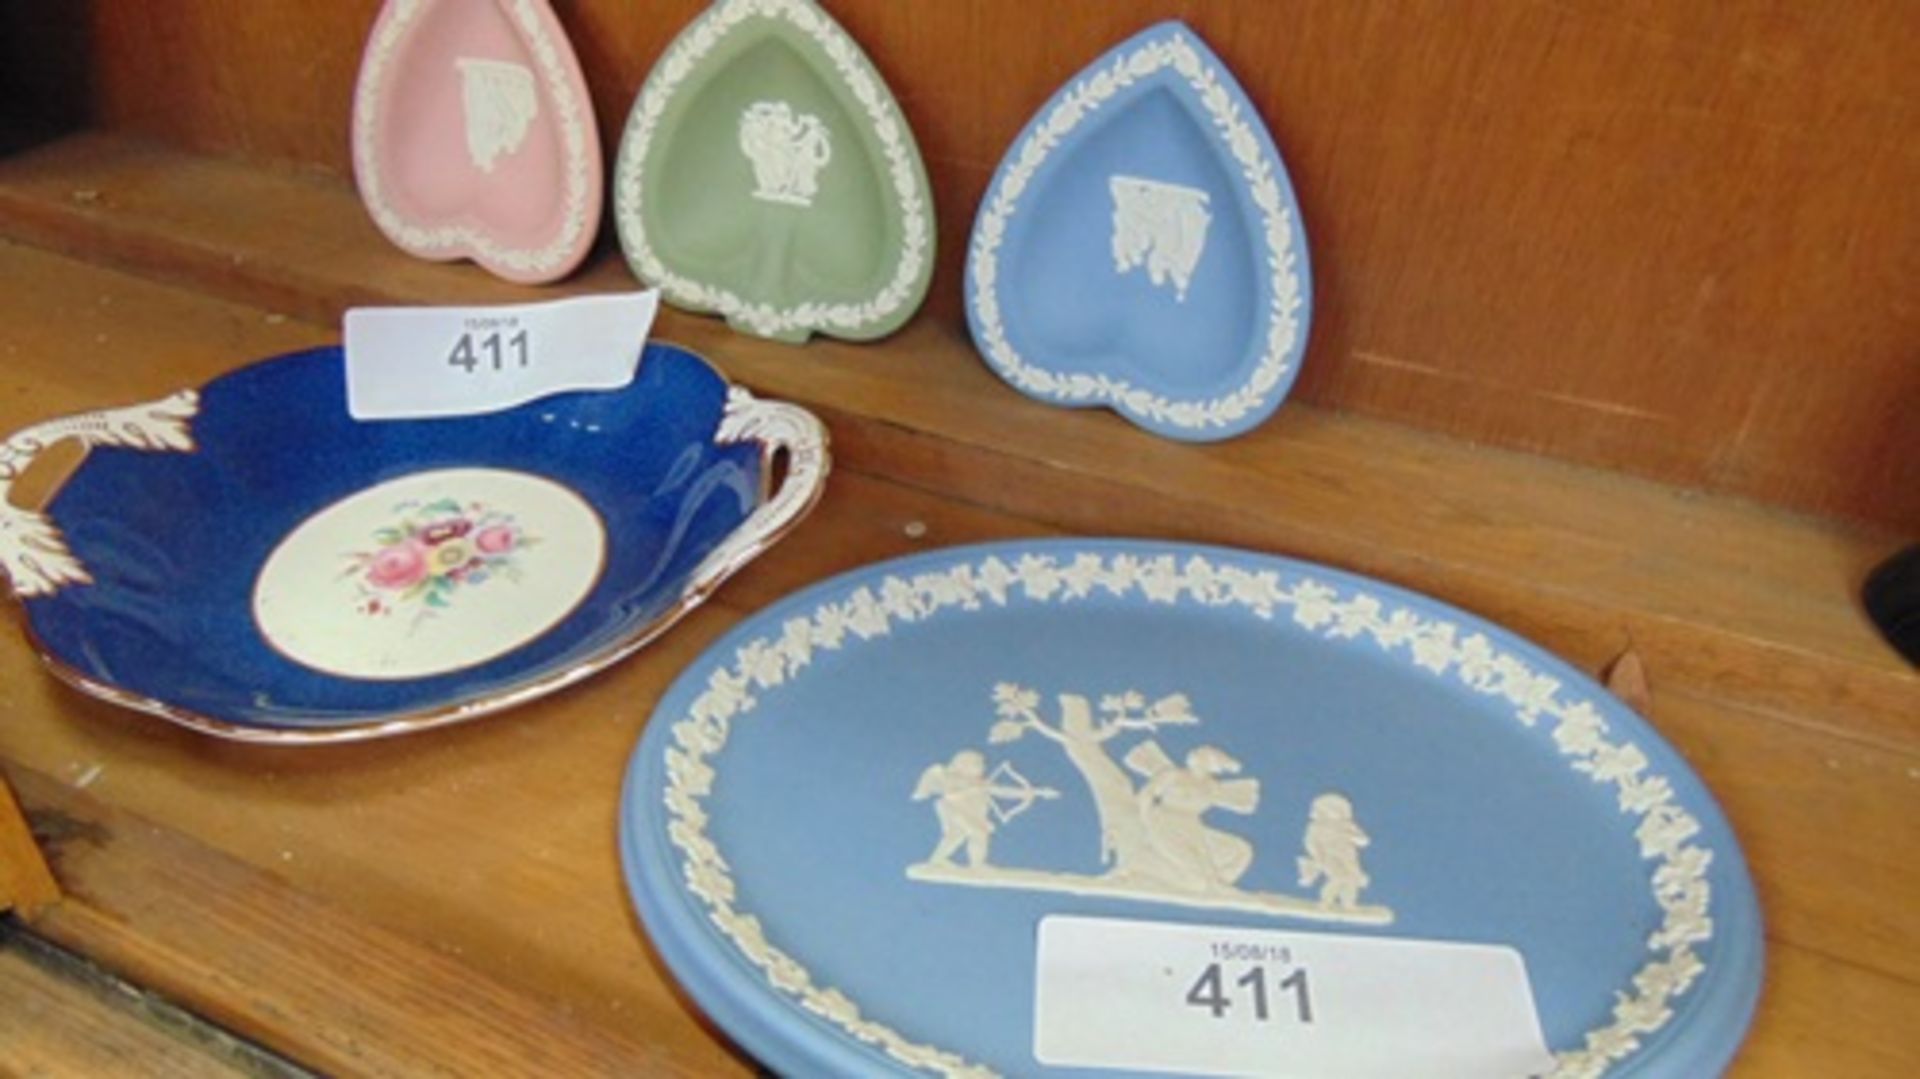 4 x Wedgwood pieces comprising blue and white oval tray 25 x 19cm, 3 x heart shaped pin trays 12 x